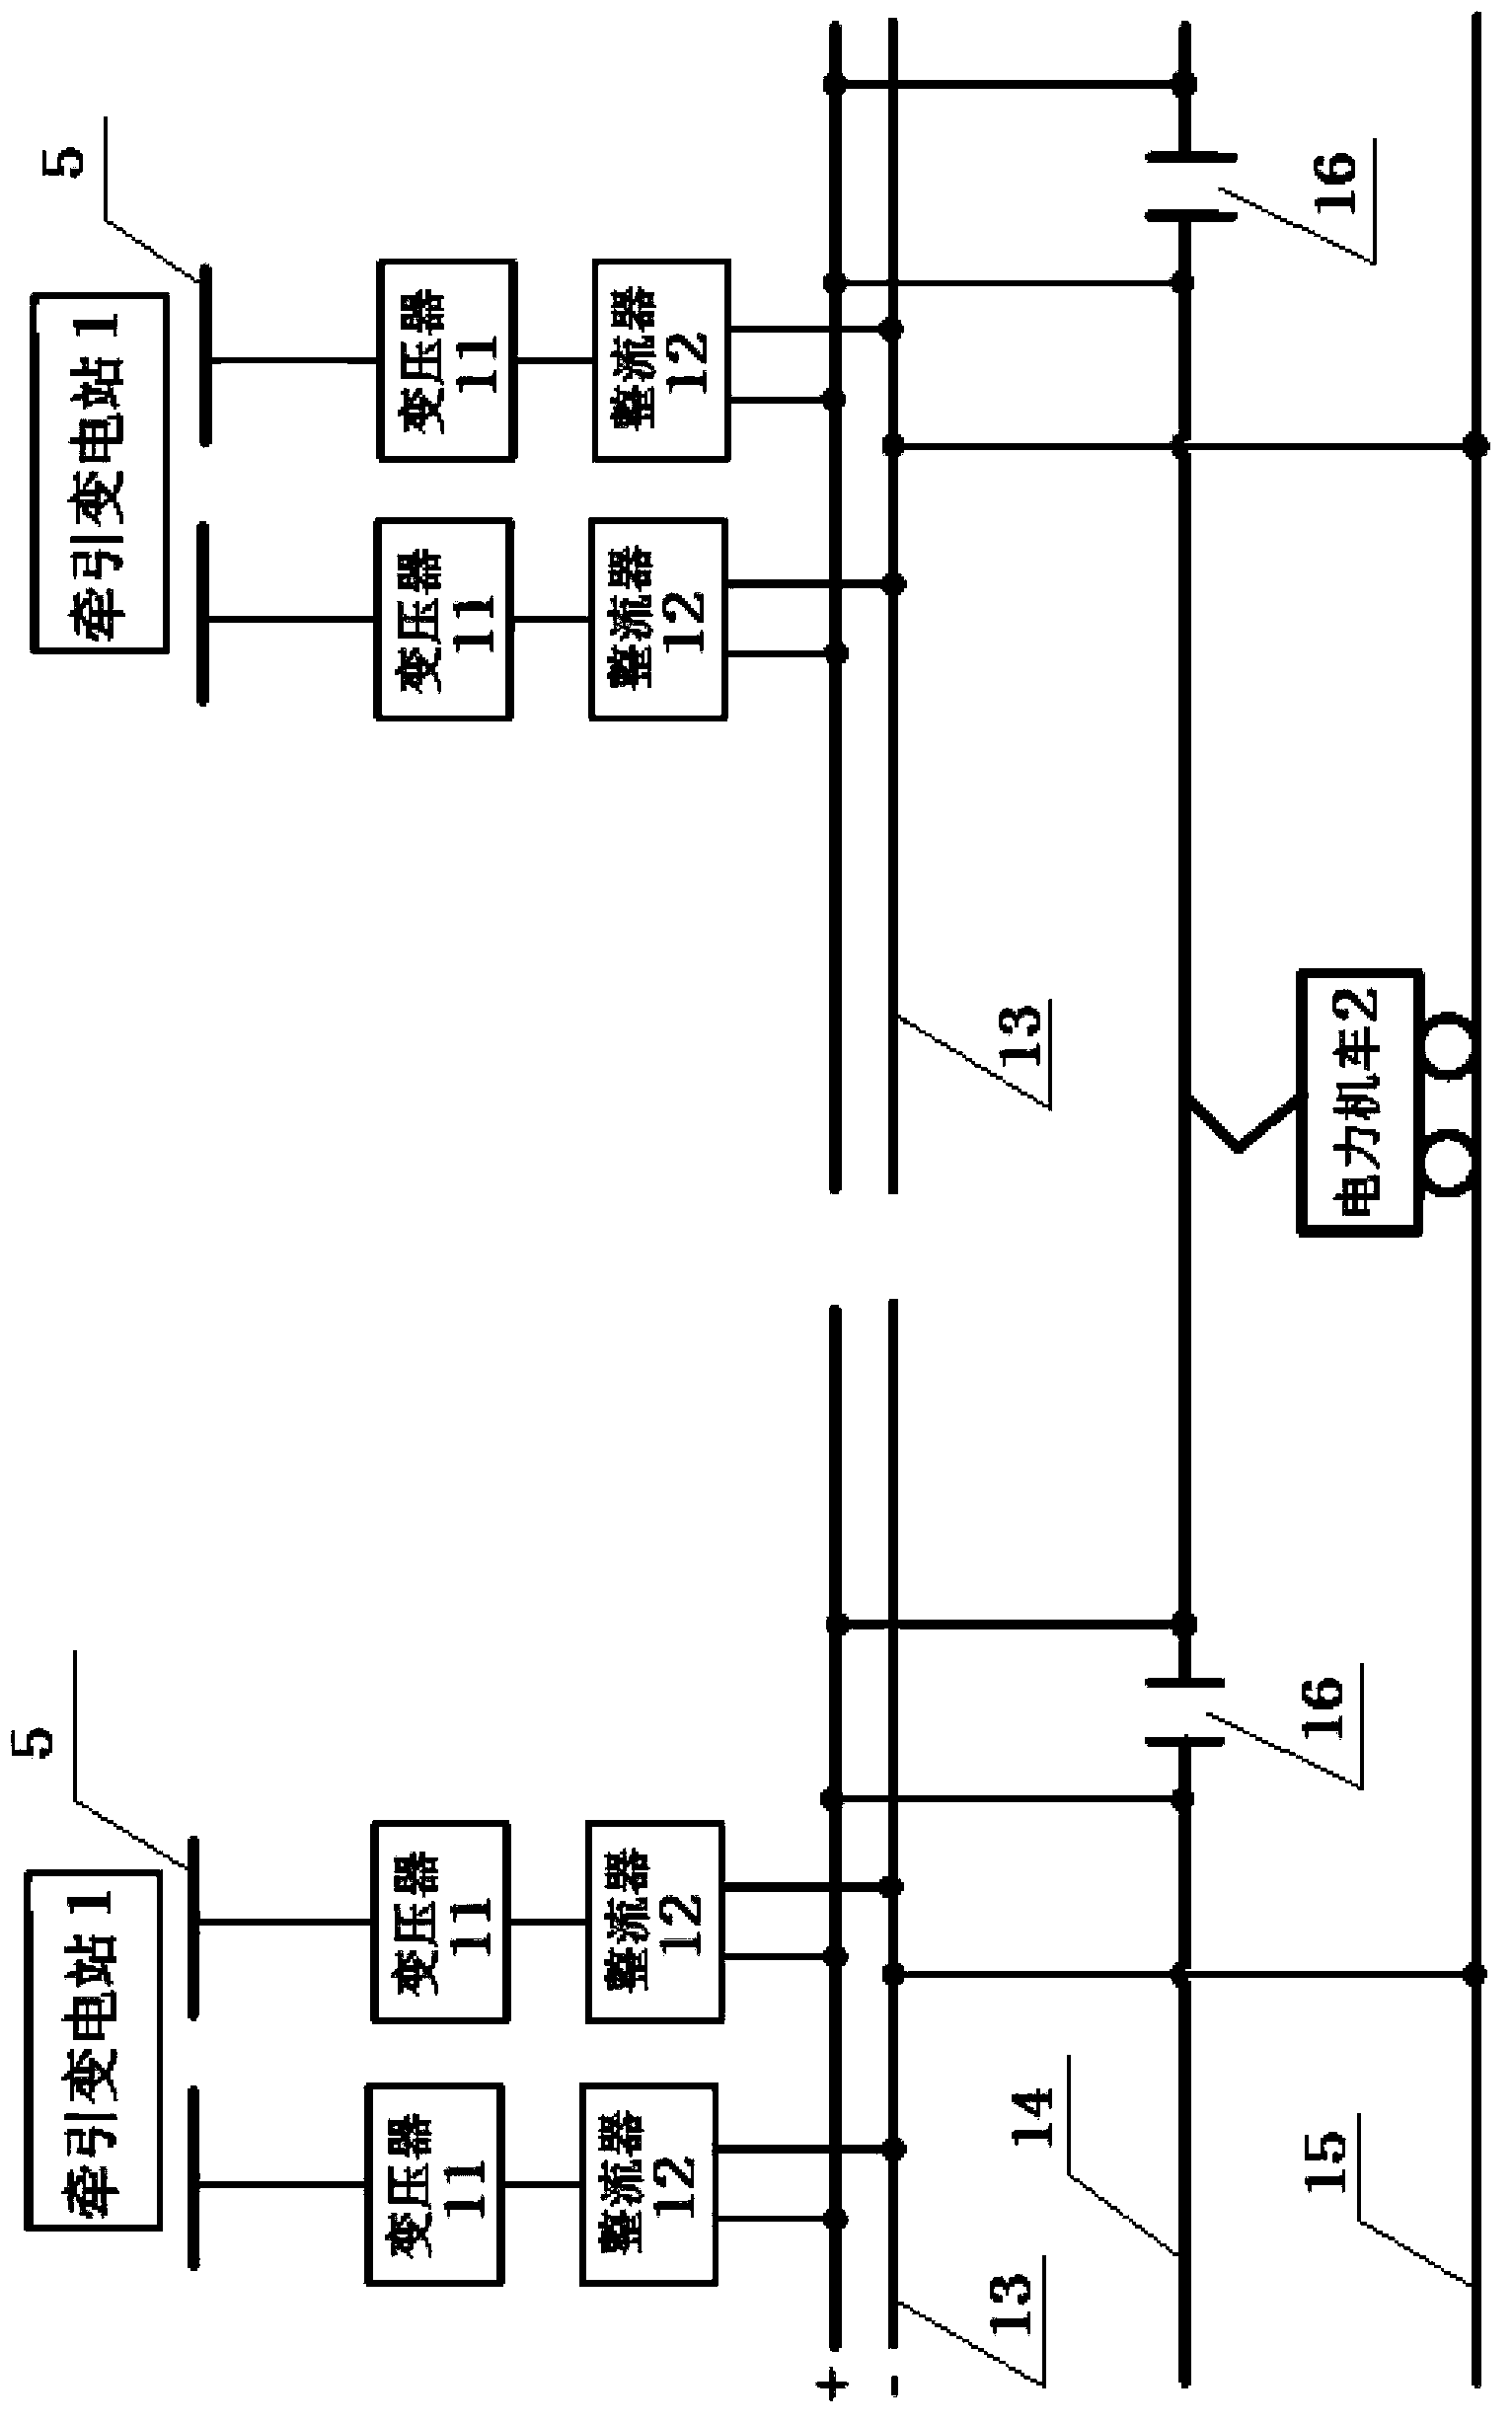 Bidirectional interactive type DC (direct-current) traction power supply system base on new energy